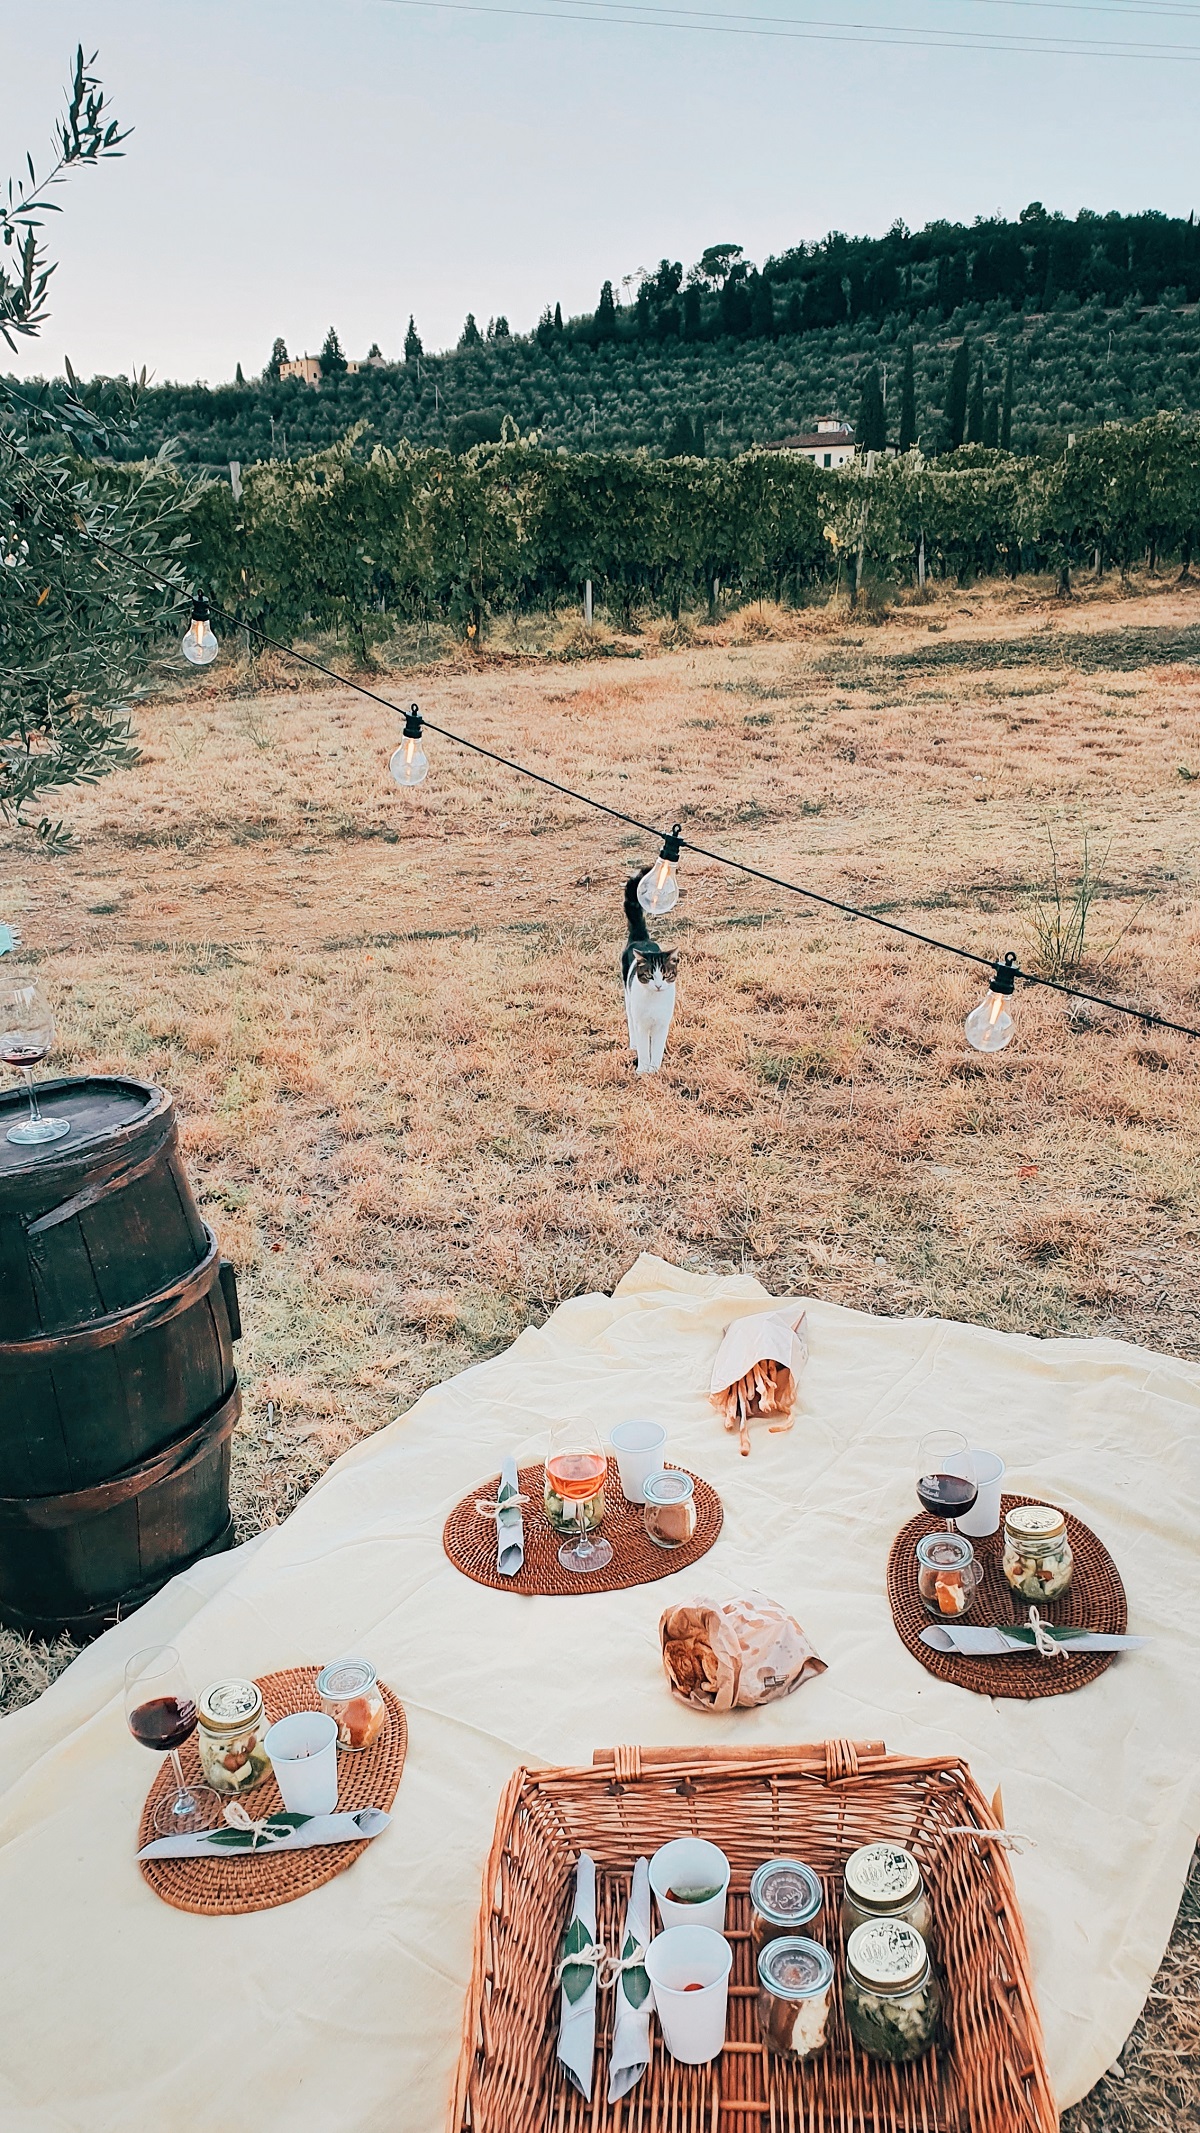 A picnic with wine cask, wine, nibbles, and a cat looking out over a Tuscan vineyard